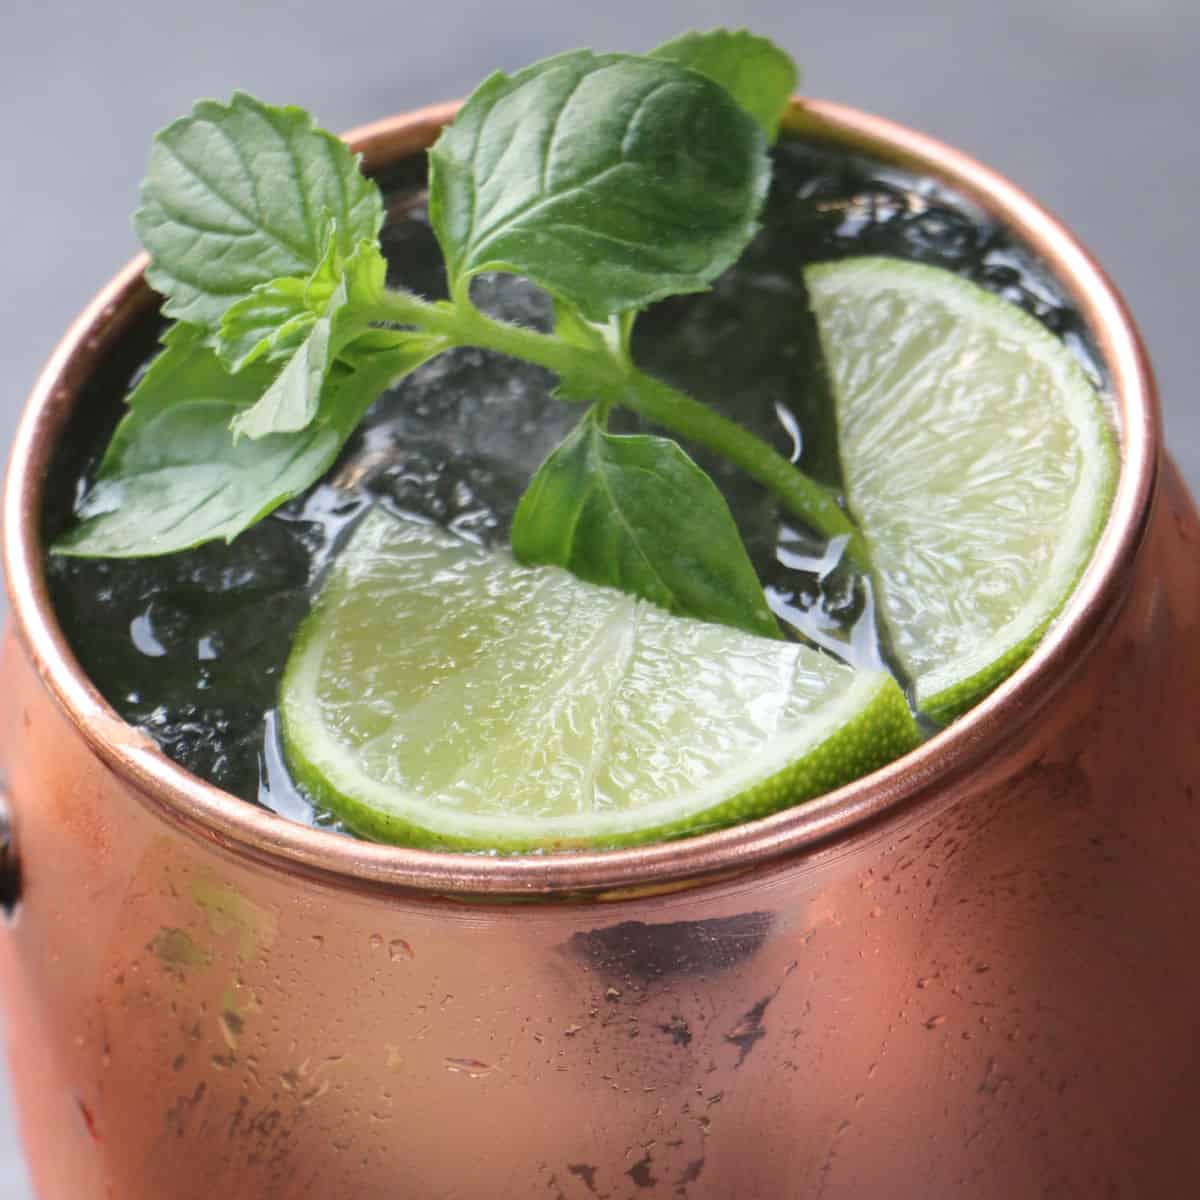 How to make a Moscow Mule